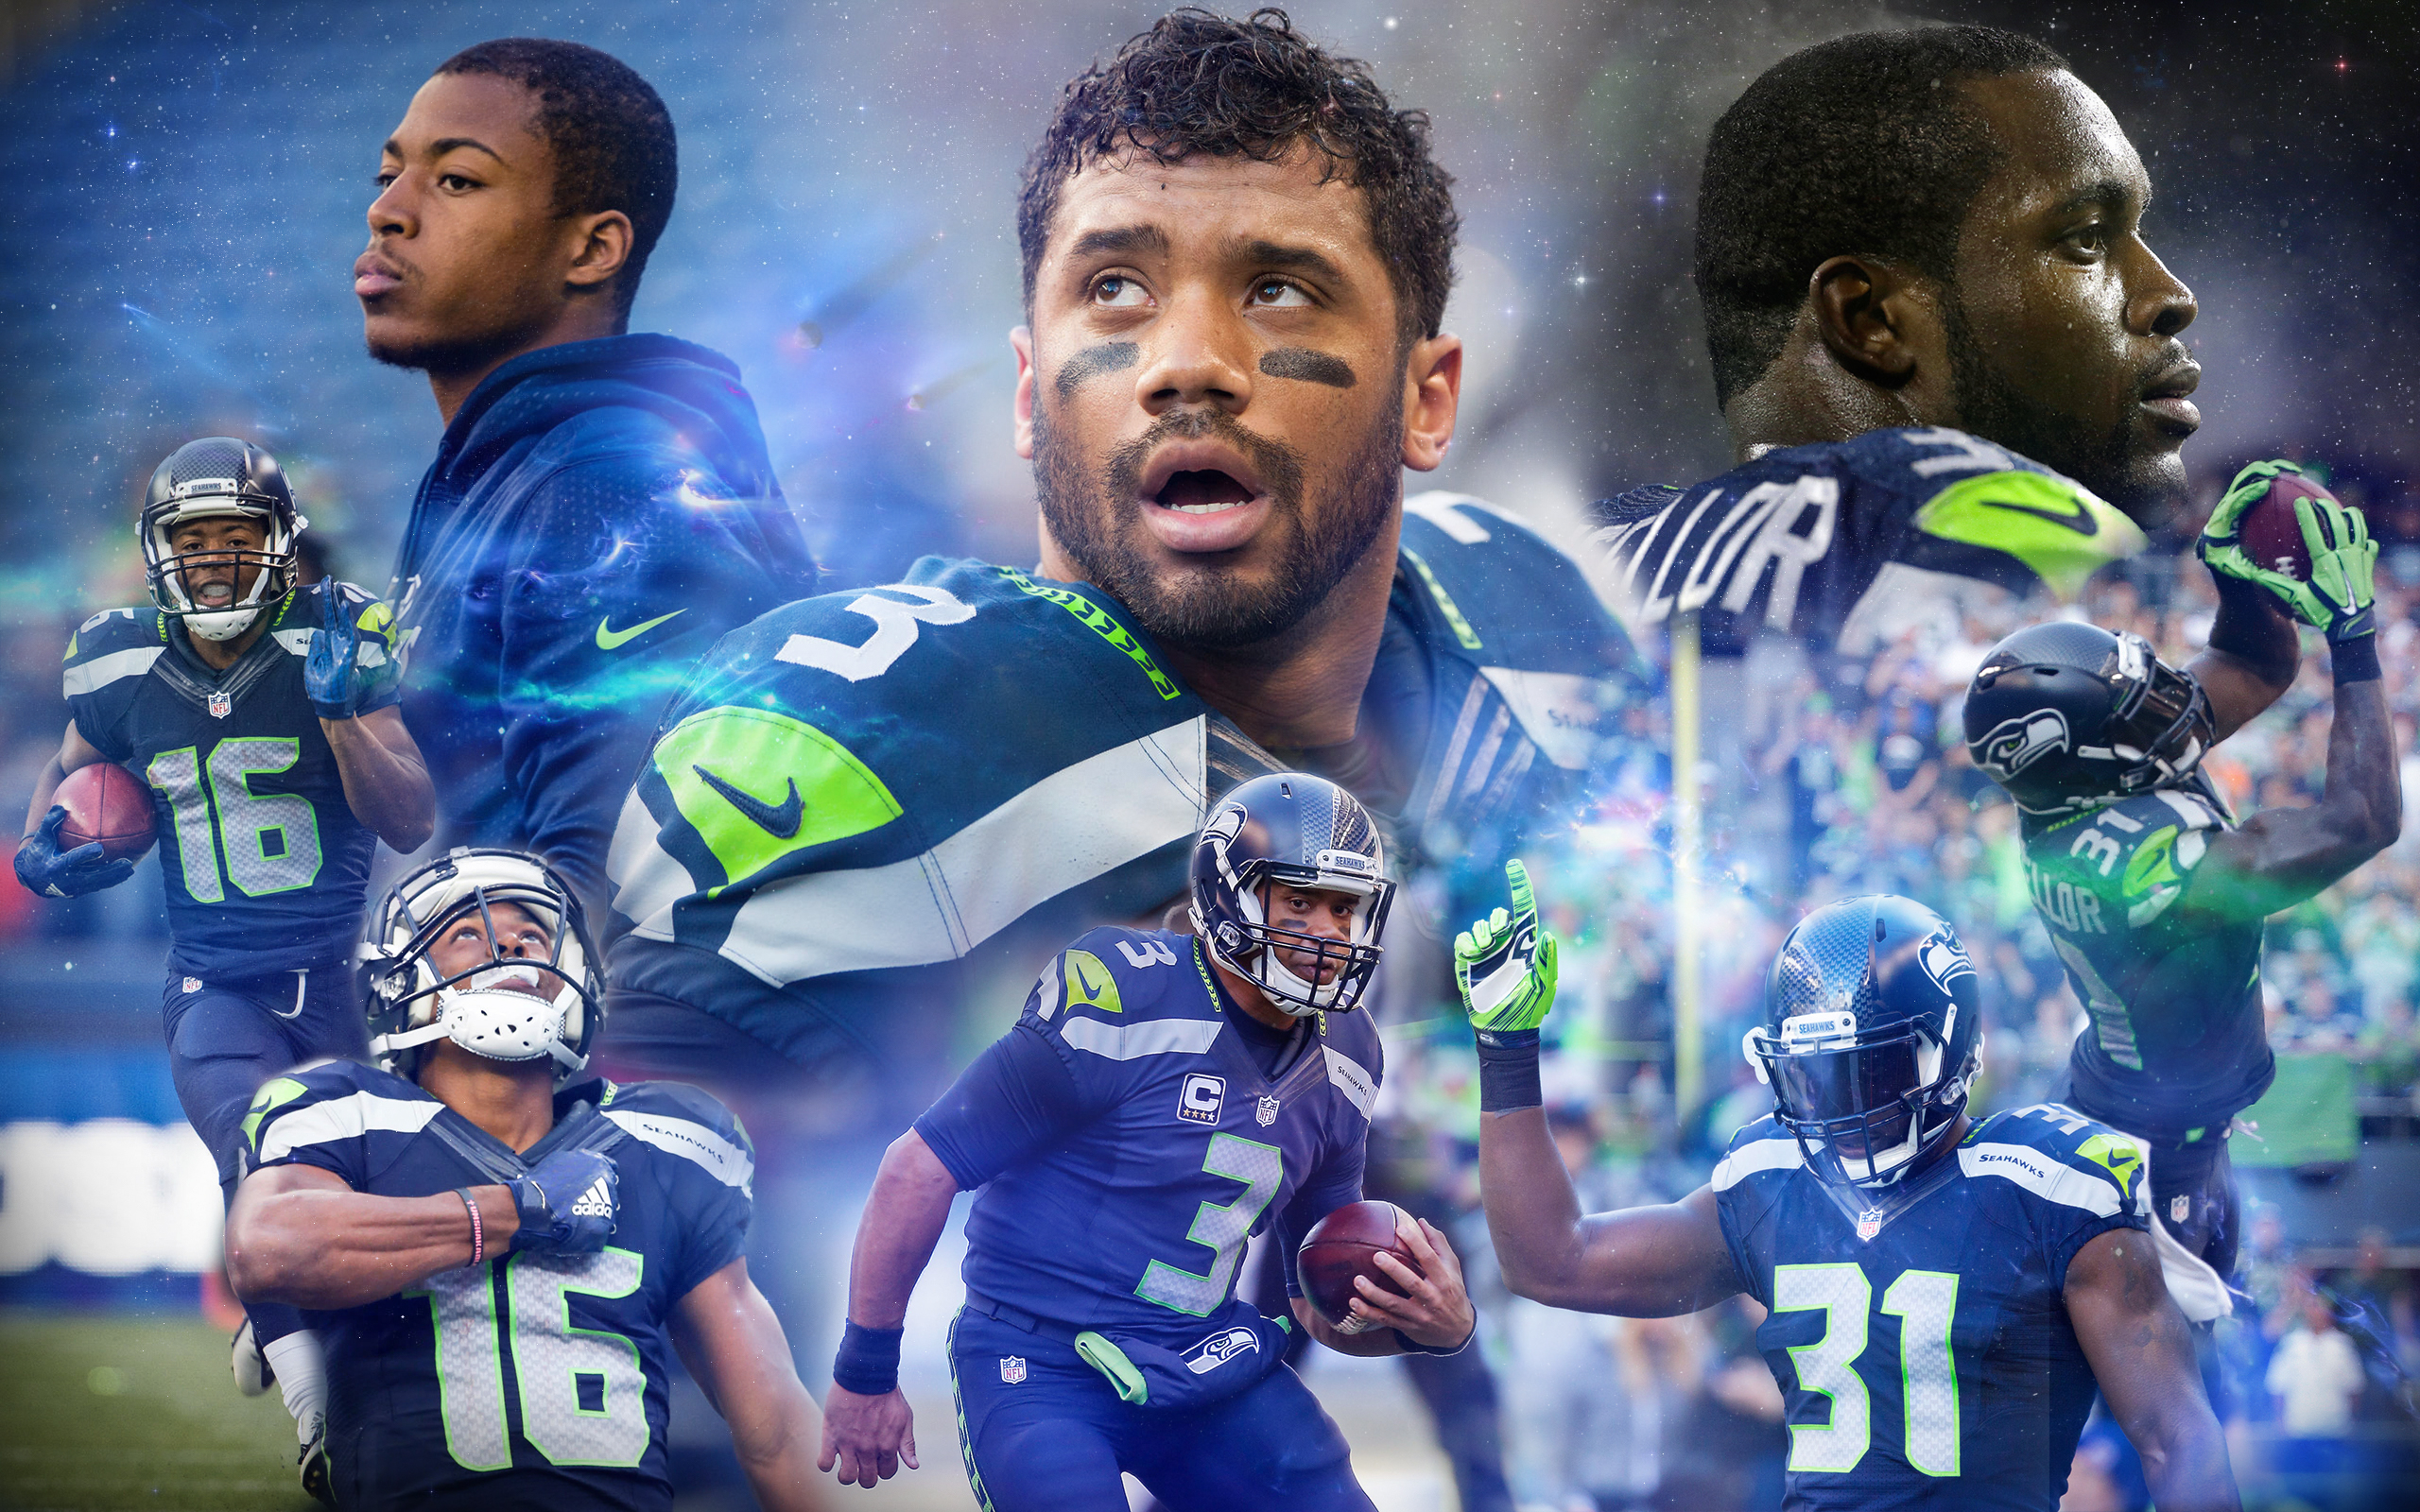 2560x1600 Seahawks Wallpaper edit i did for a friend. (photos are not my own, feel free to use/re-Edit) : r/Seahawks